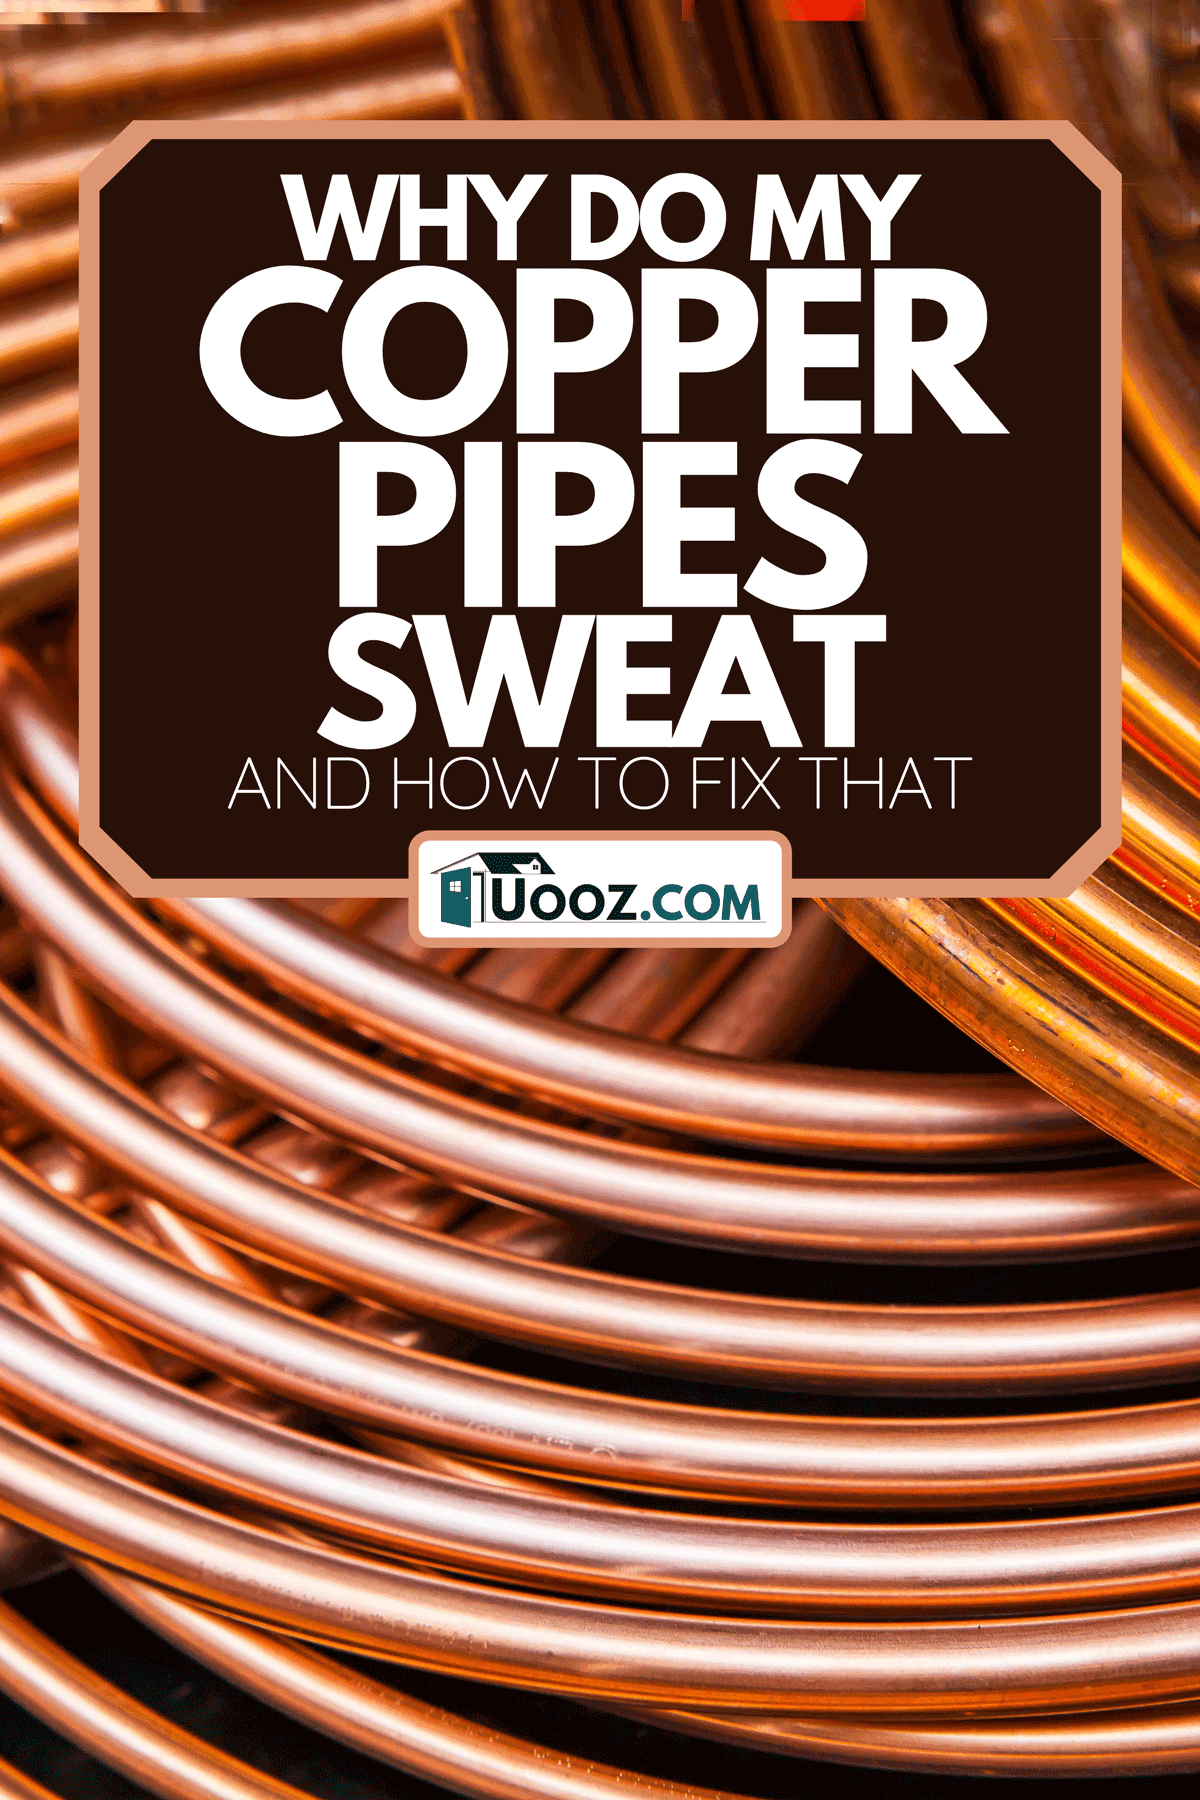 A twisted new copper tubes, Why Do My Copper Pipes Sweat [And How To Fix That]